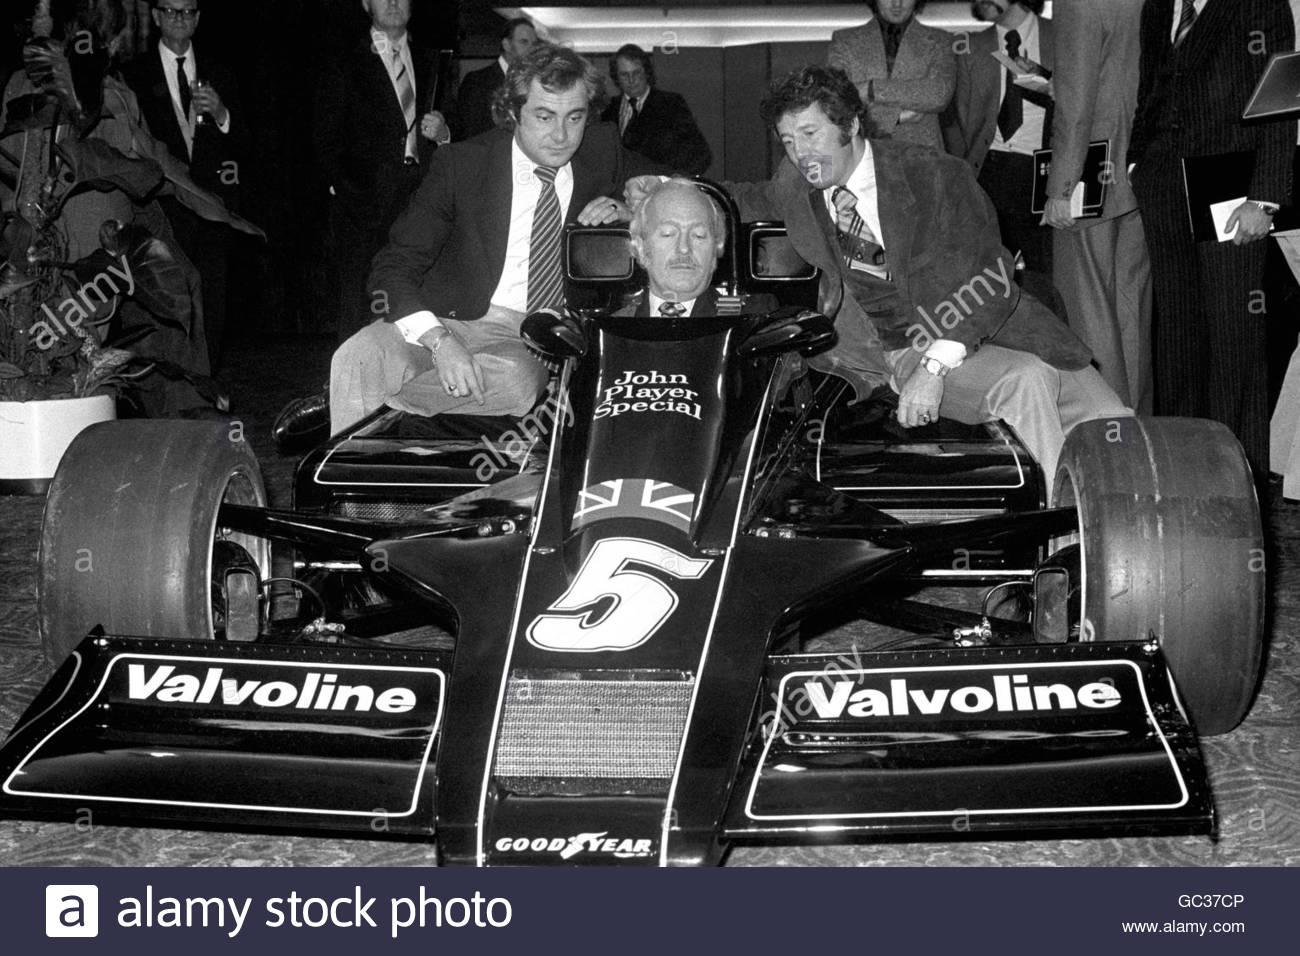 The new Lotus 78 (codenamed the John Player Special Mk. III) is unveiled to the media during its launch at London's Royal Garden Hotel. Lotus chief Colin Chapman sits in the new car, flanked by drivers Mario Andretti (right) and Gunnar Nilsson. December 21, 1976.